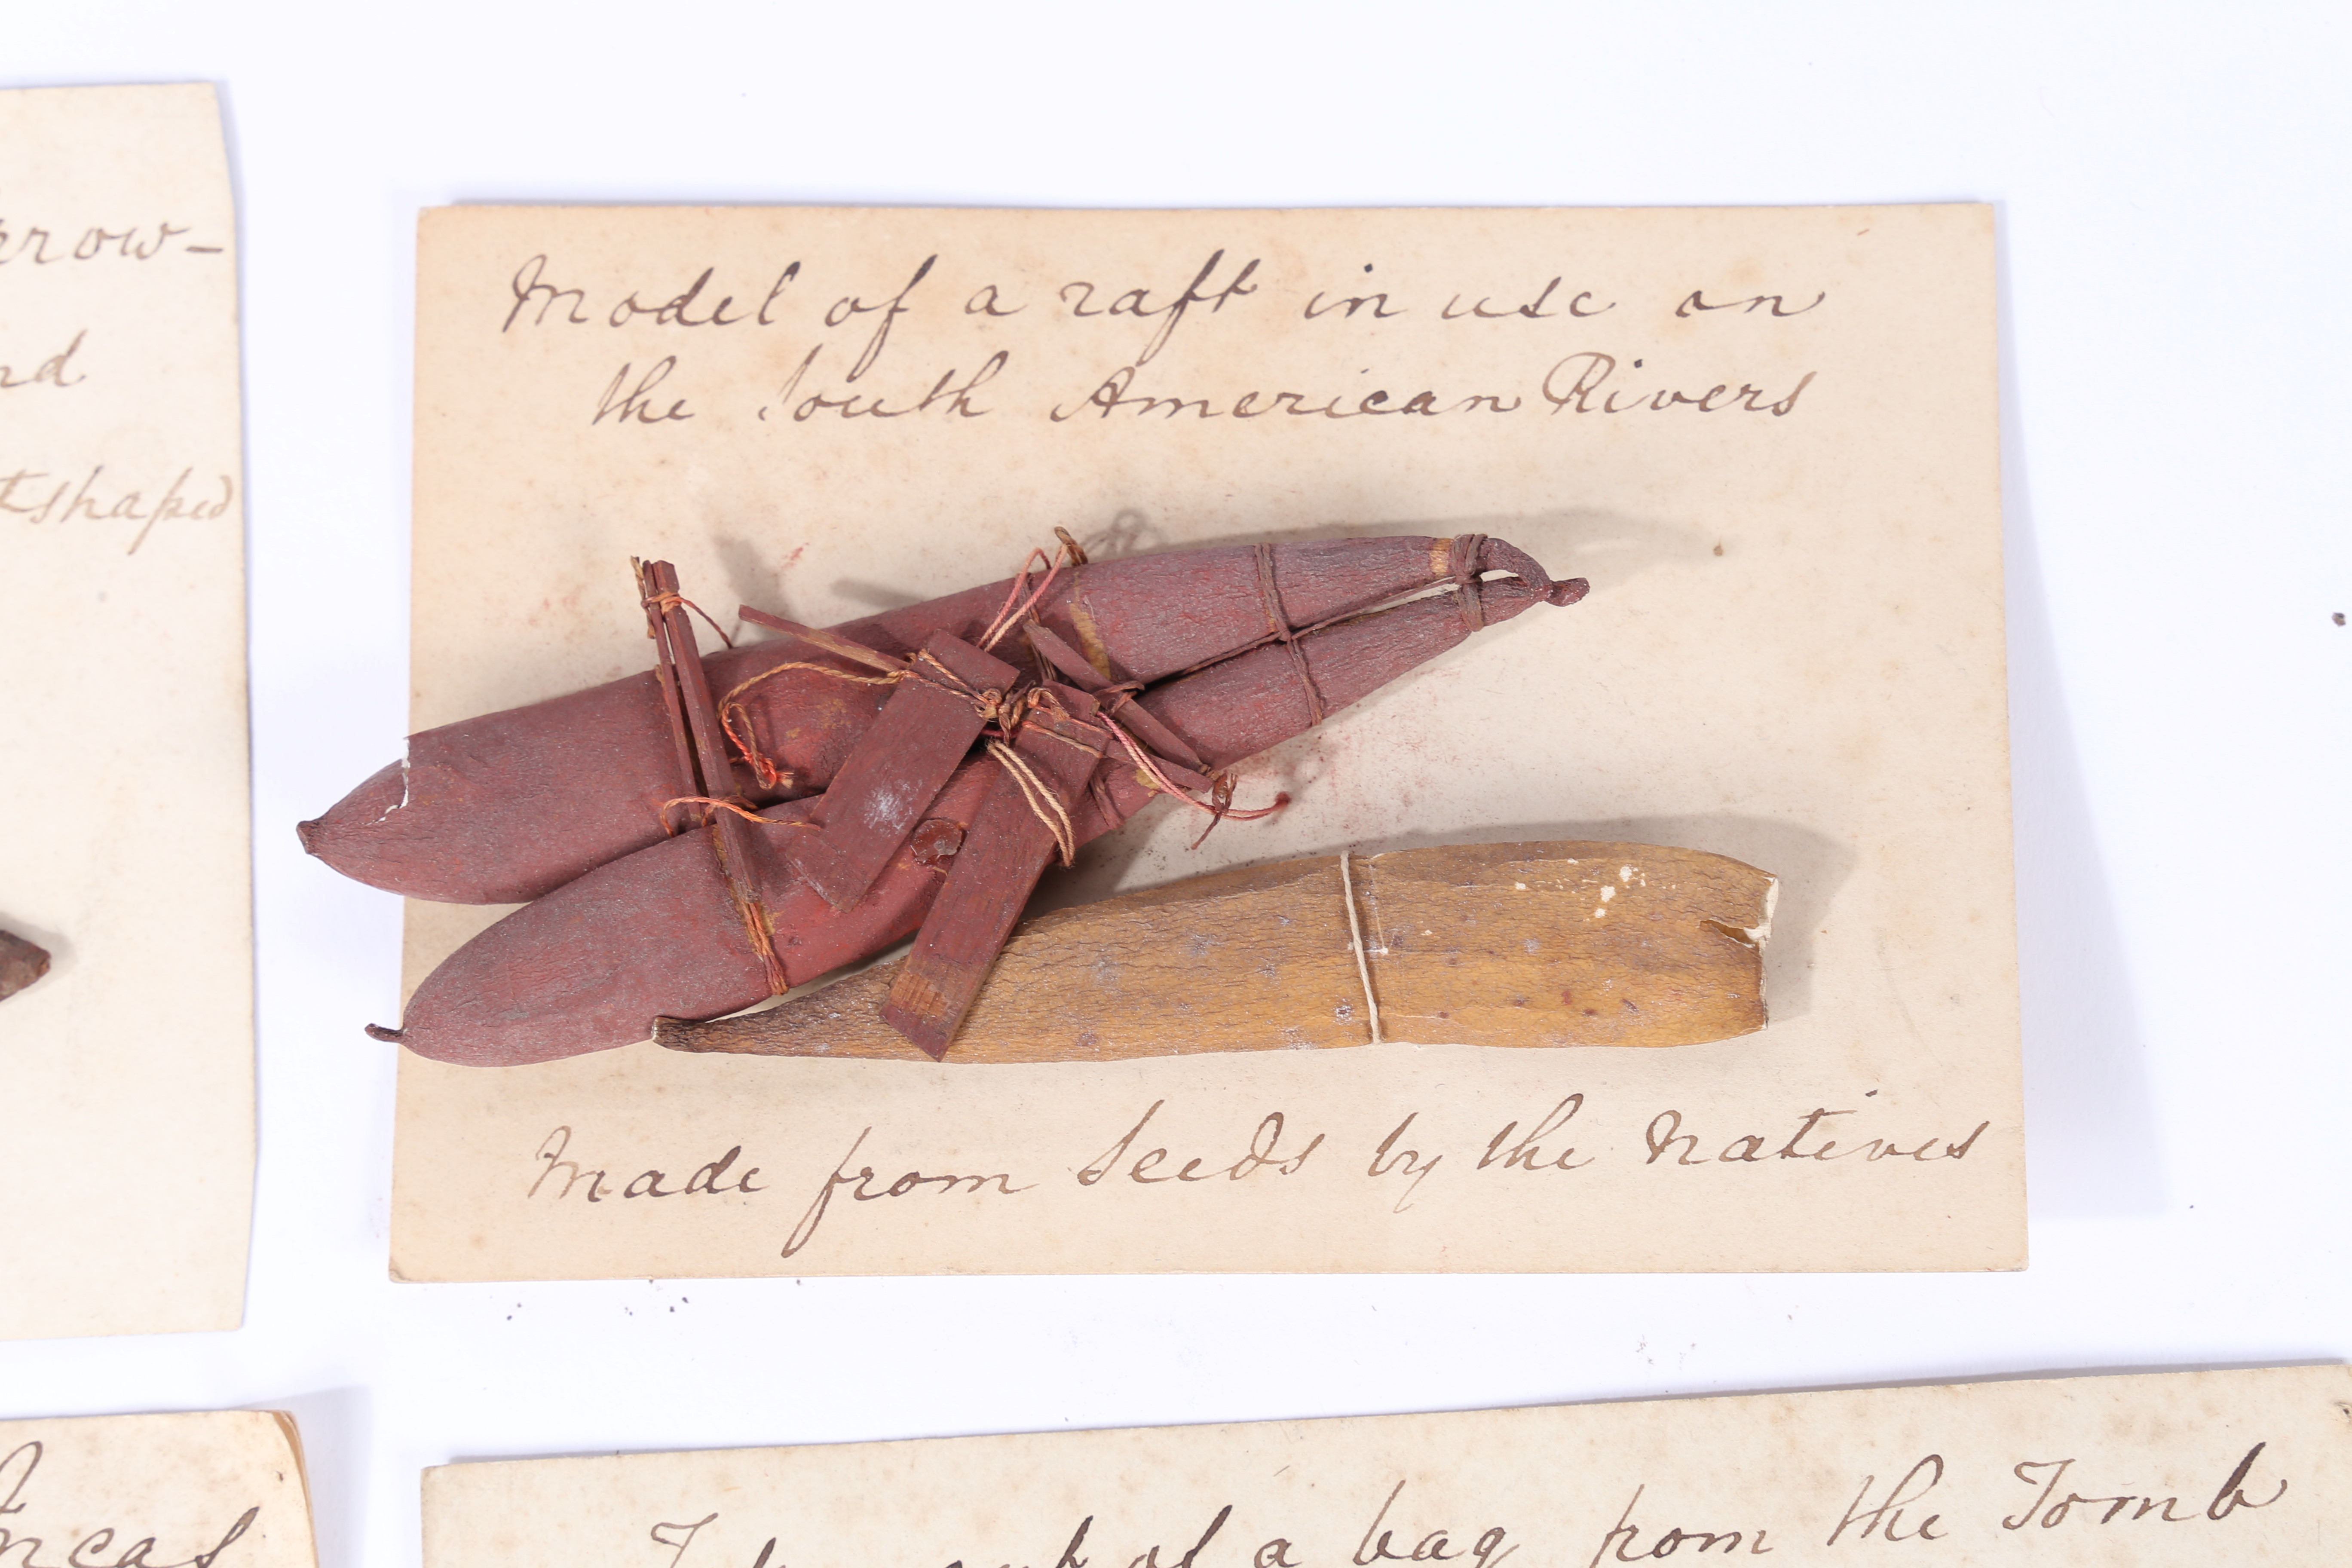 AN INTERESTING COLLECTION OF SOUTH AMERICAN ARTIFACTS, WITH NOTES FROM THE MID 19TH CENTURY. - Image 6 of 6